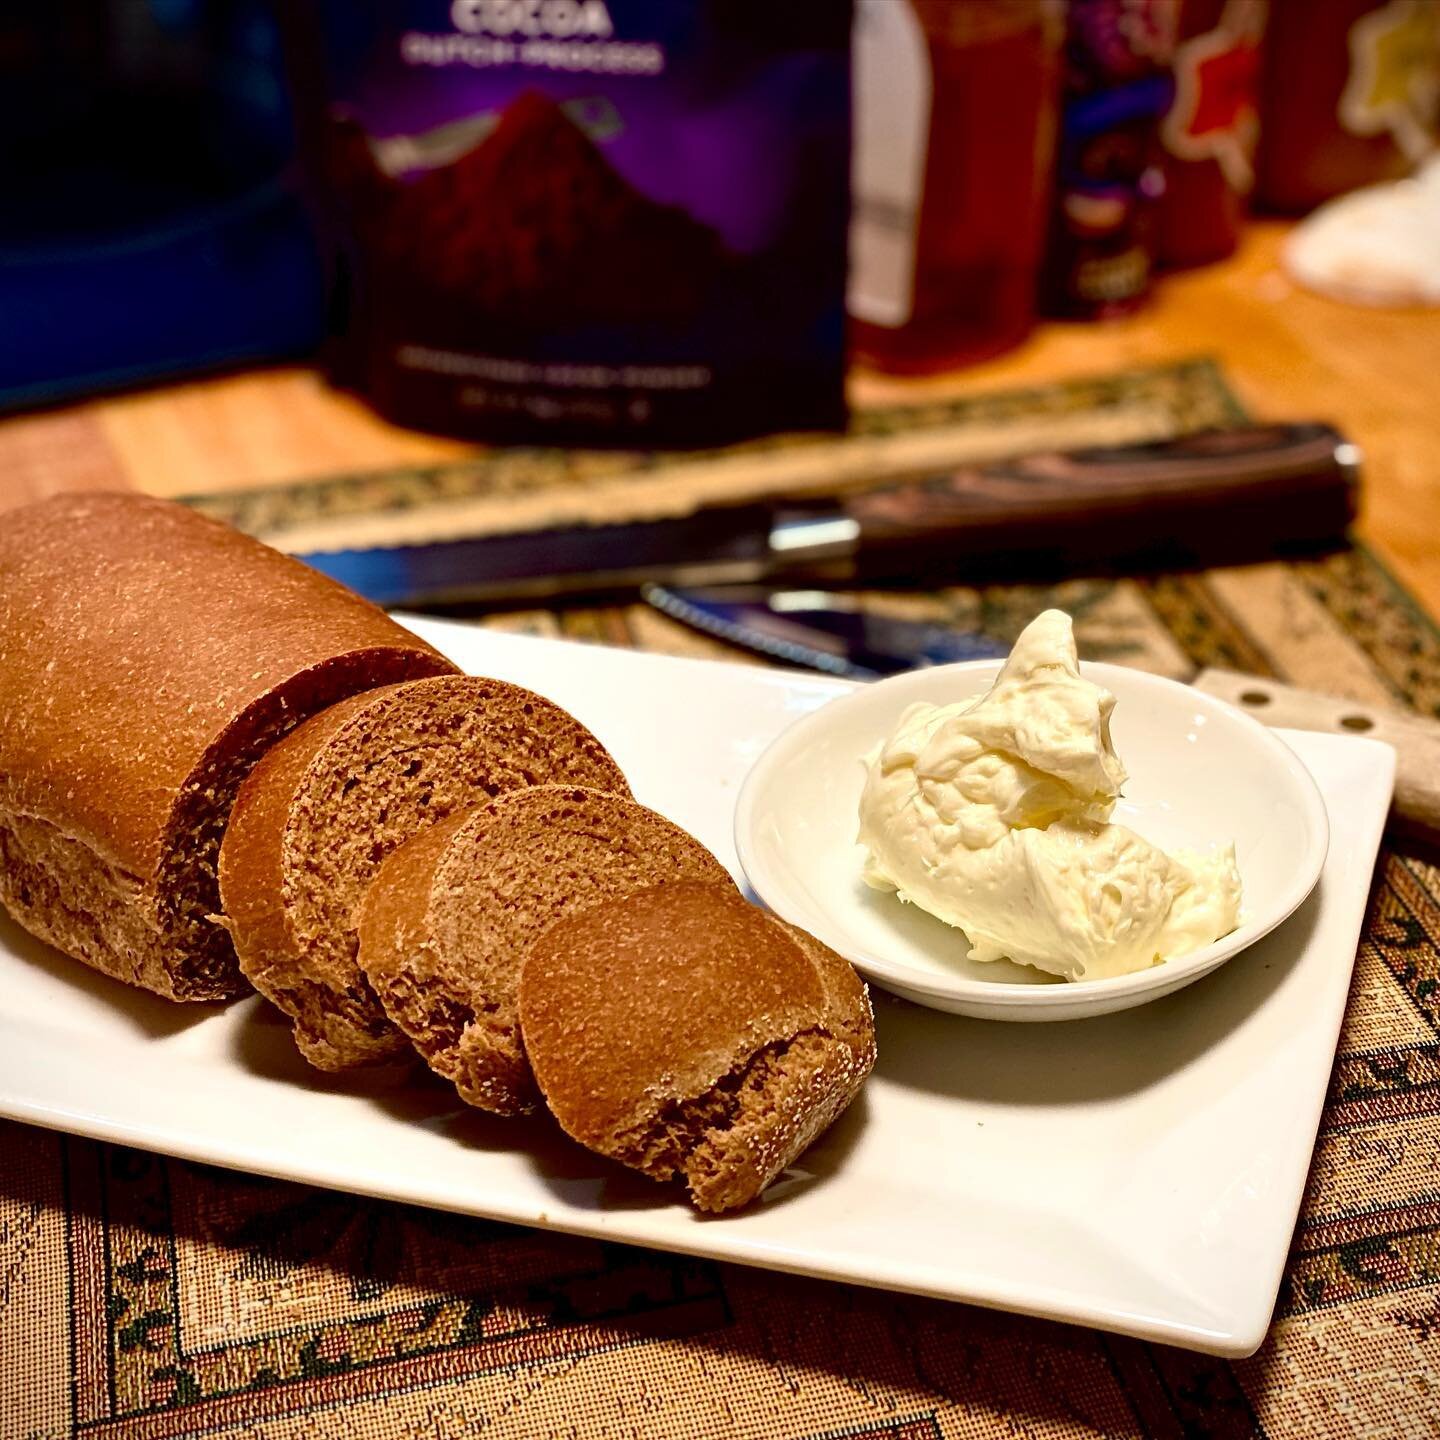 From the test kitchen, molasses coco bread you may find at Outback Steakhouse&hellip;